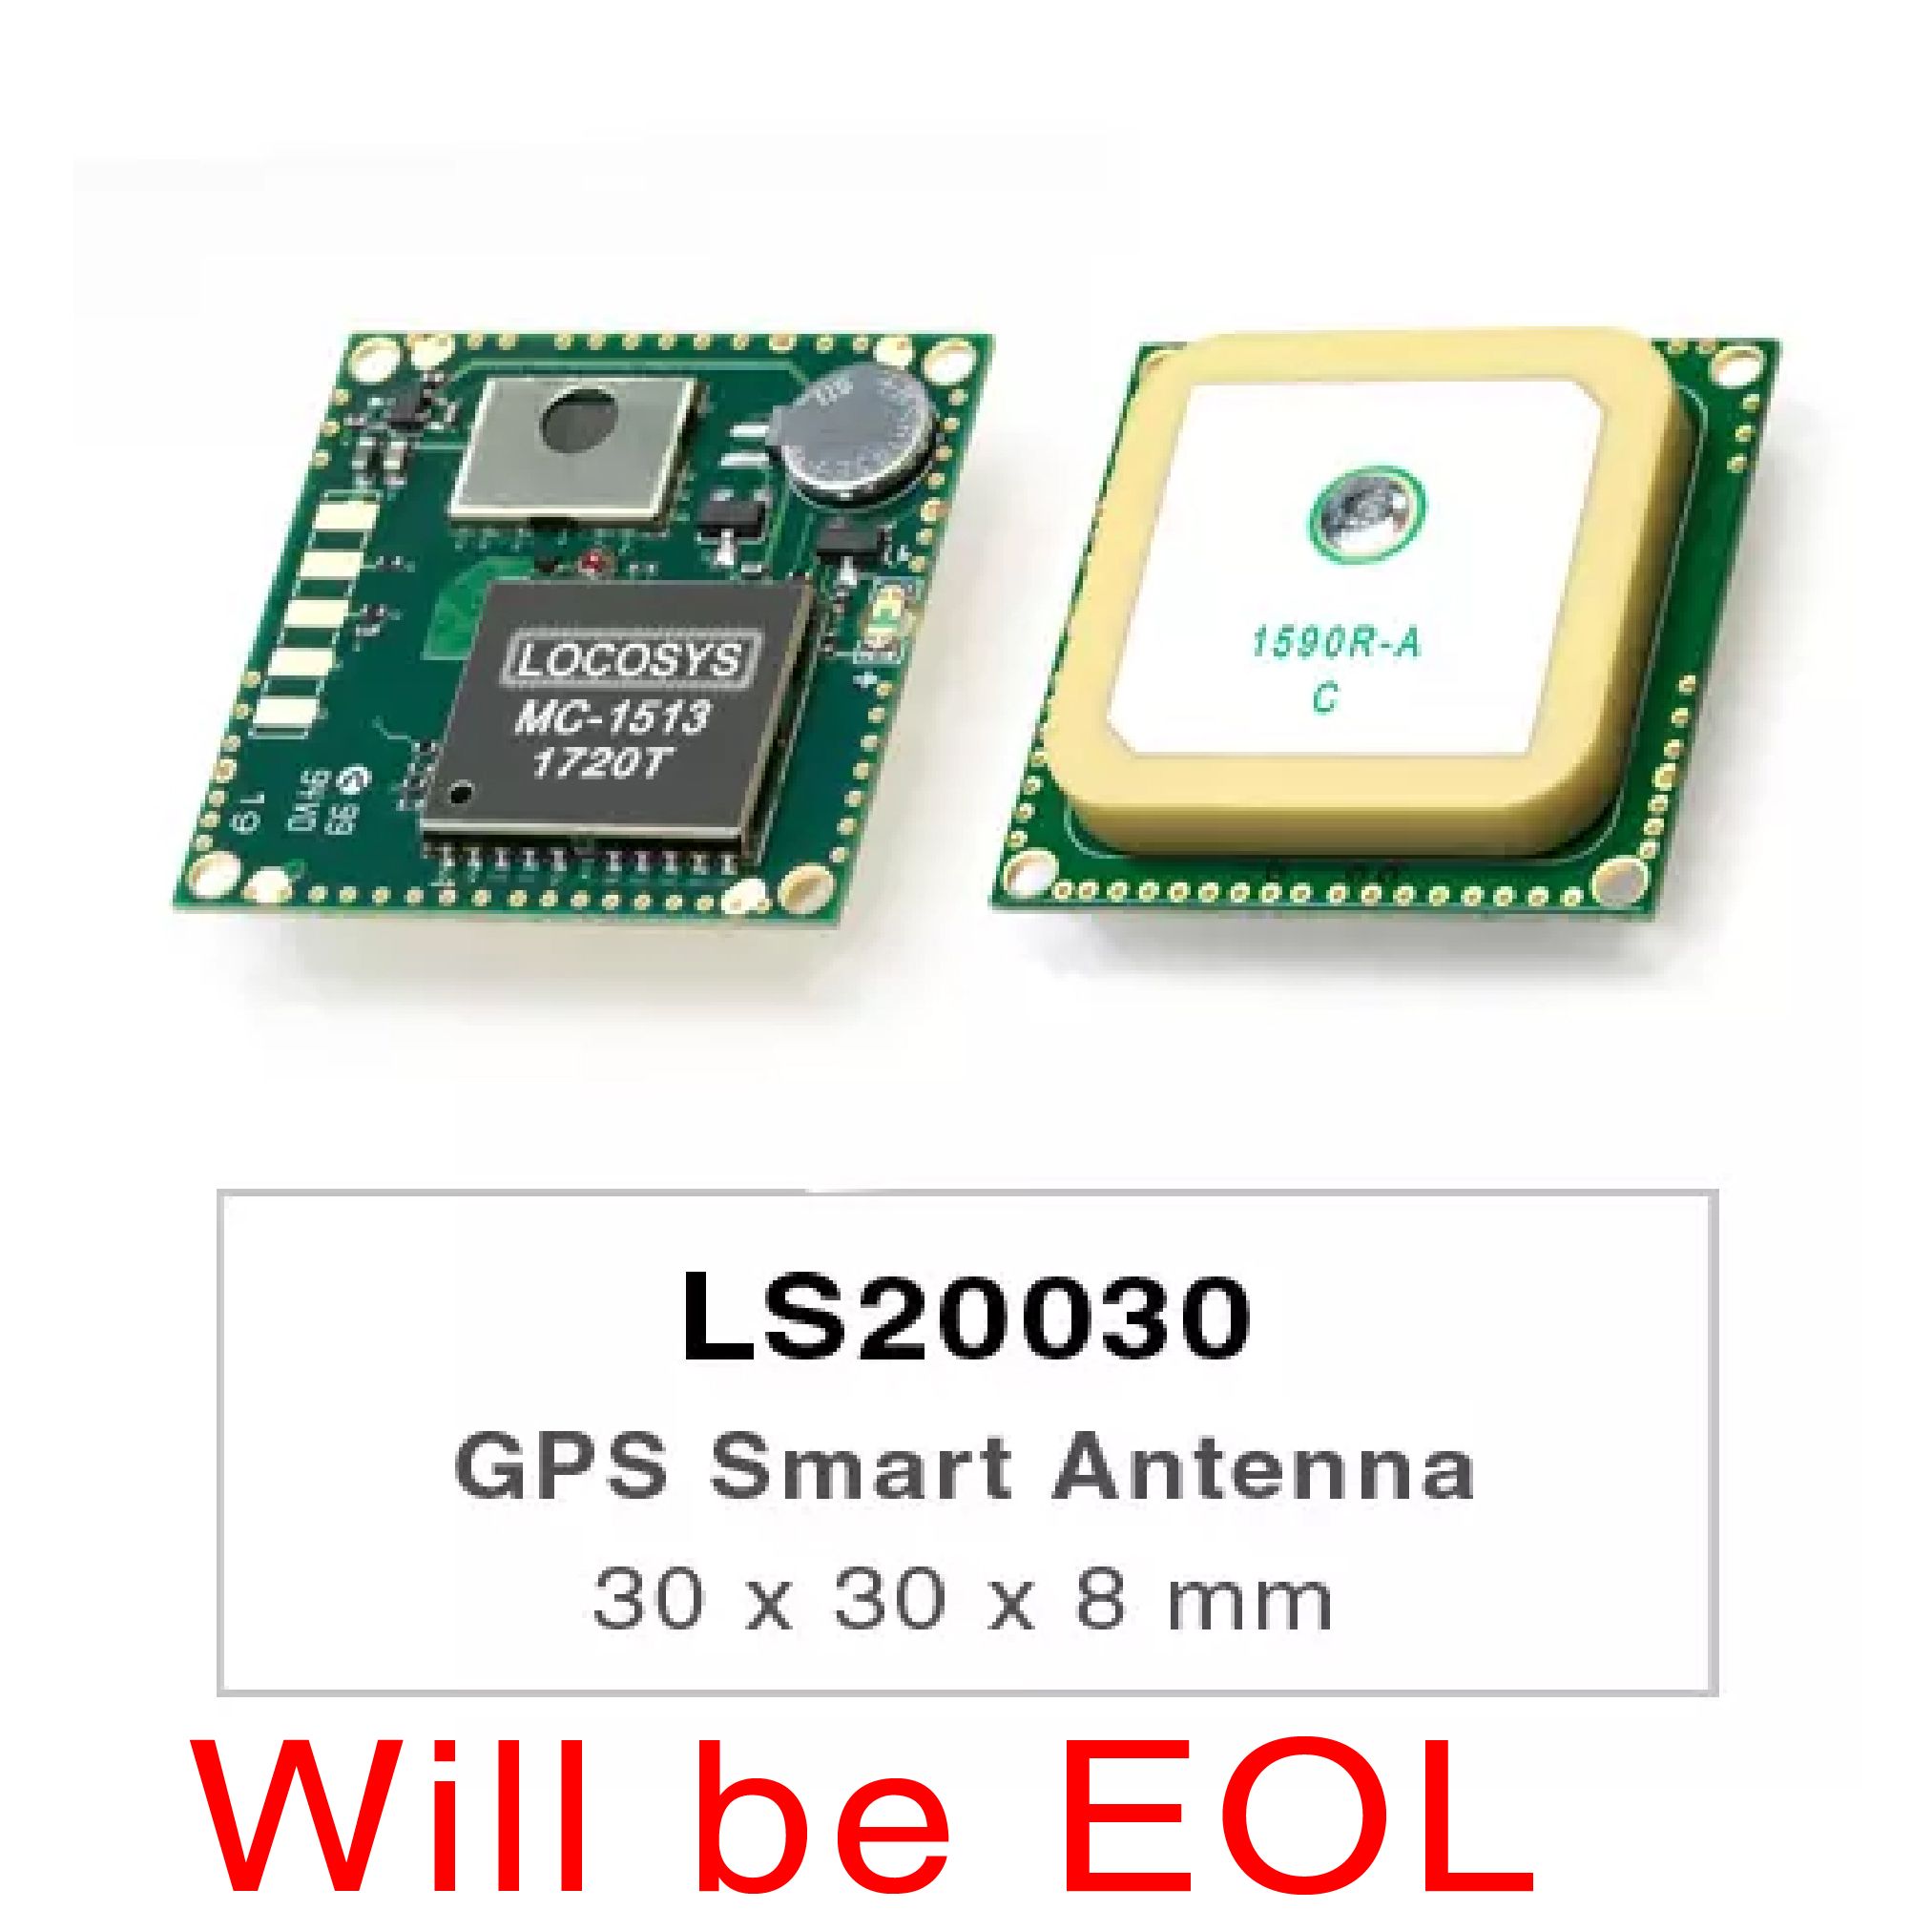 LS20030/31/32 series products are complete GPS smart antenna receivers, including an embedded antenna and GPS receiver circuits, designed for a broad spectrum of OEM system applications.